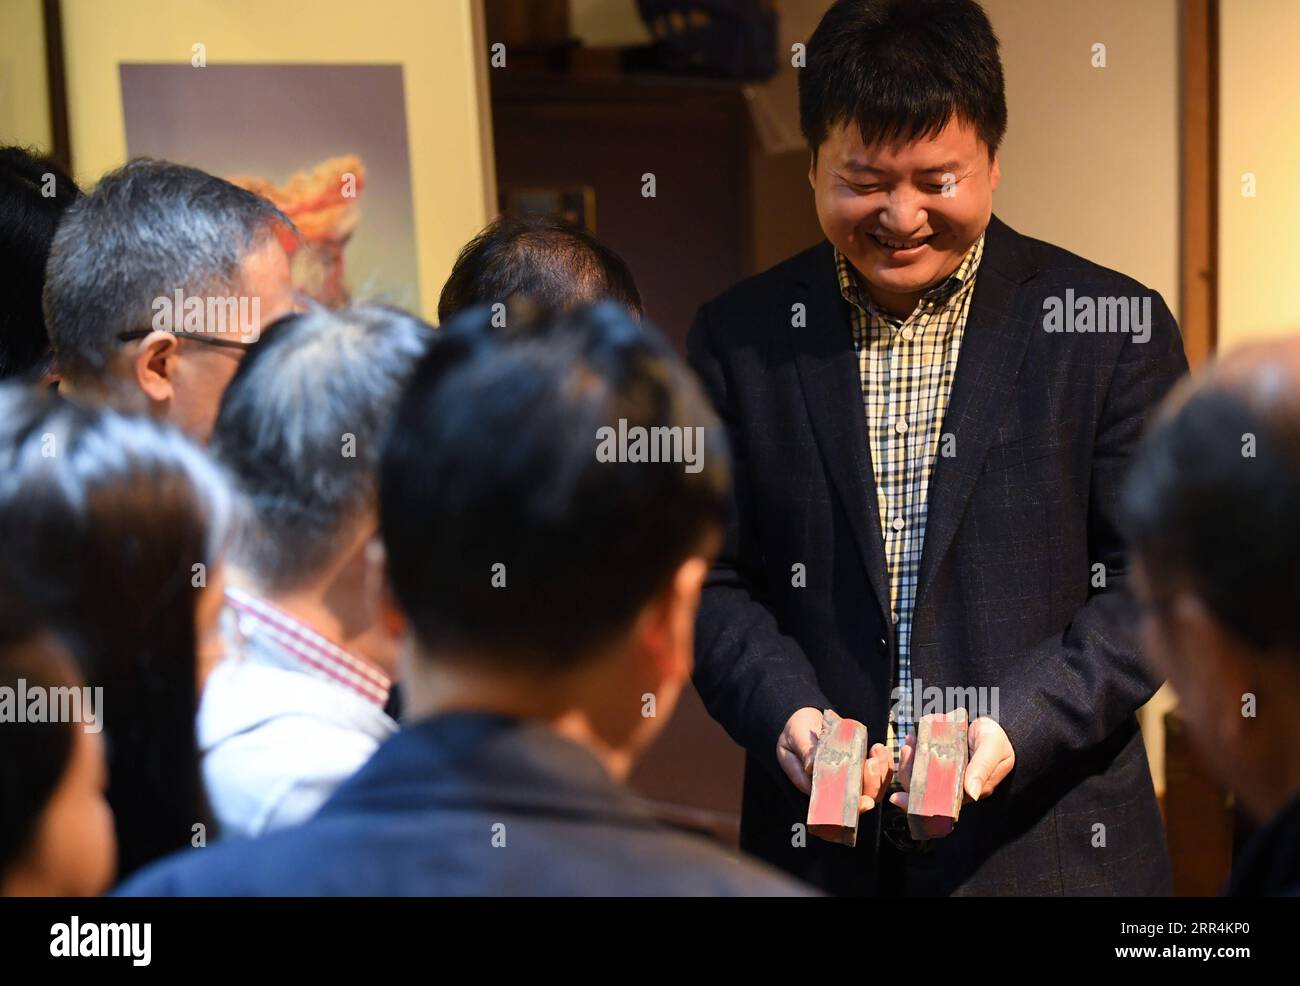 201208 -- HANGZHOU, Dec. 8, 2020 -- Jiang Sihai, vice president of the Changhua stone industry association, presents Jixue stones to visitors at a seal culture experience museum in Changhua Town of Lin an District, Hangzhou City of east China s Zhejiang Province, Nov. 6, 2020. The Jixue stone, featuring chicken-blood bright red traces, a local specialty in Changhua Town of Hangzhou City, is a highly sought-after material for making seals and carving handicrafts. Inspired by its colors, artisan have been bringing ingeniously-designed and broadly-themed creations throughout its long history and Stock Photo